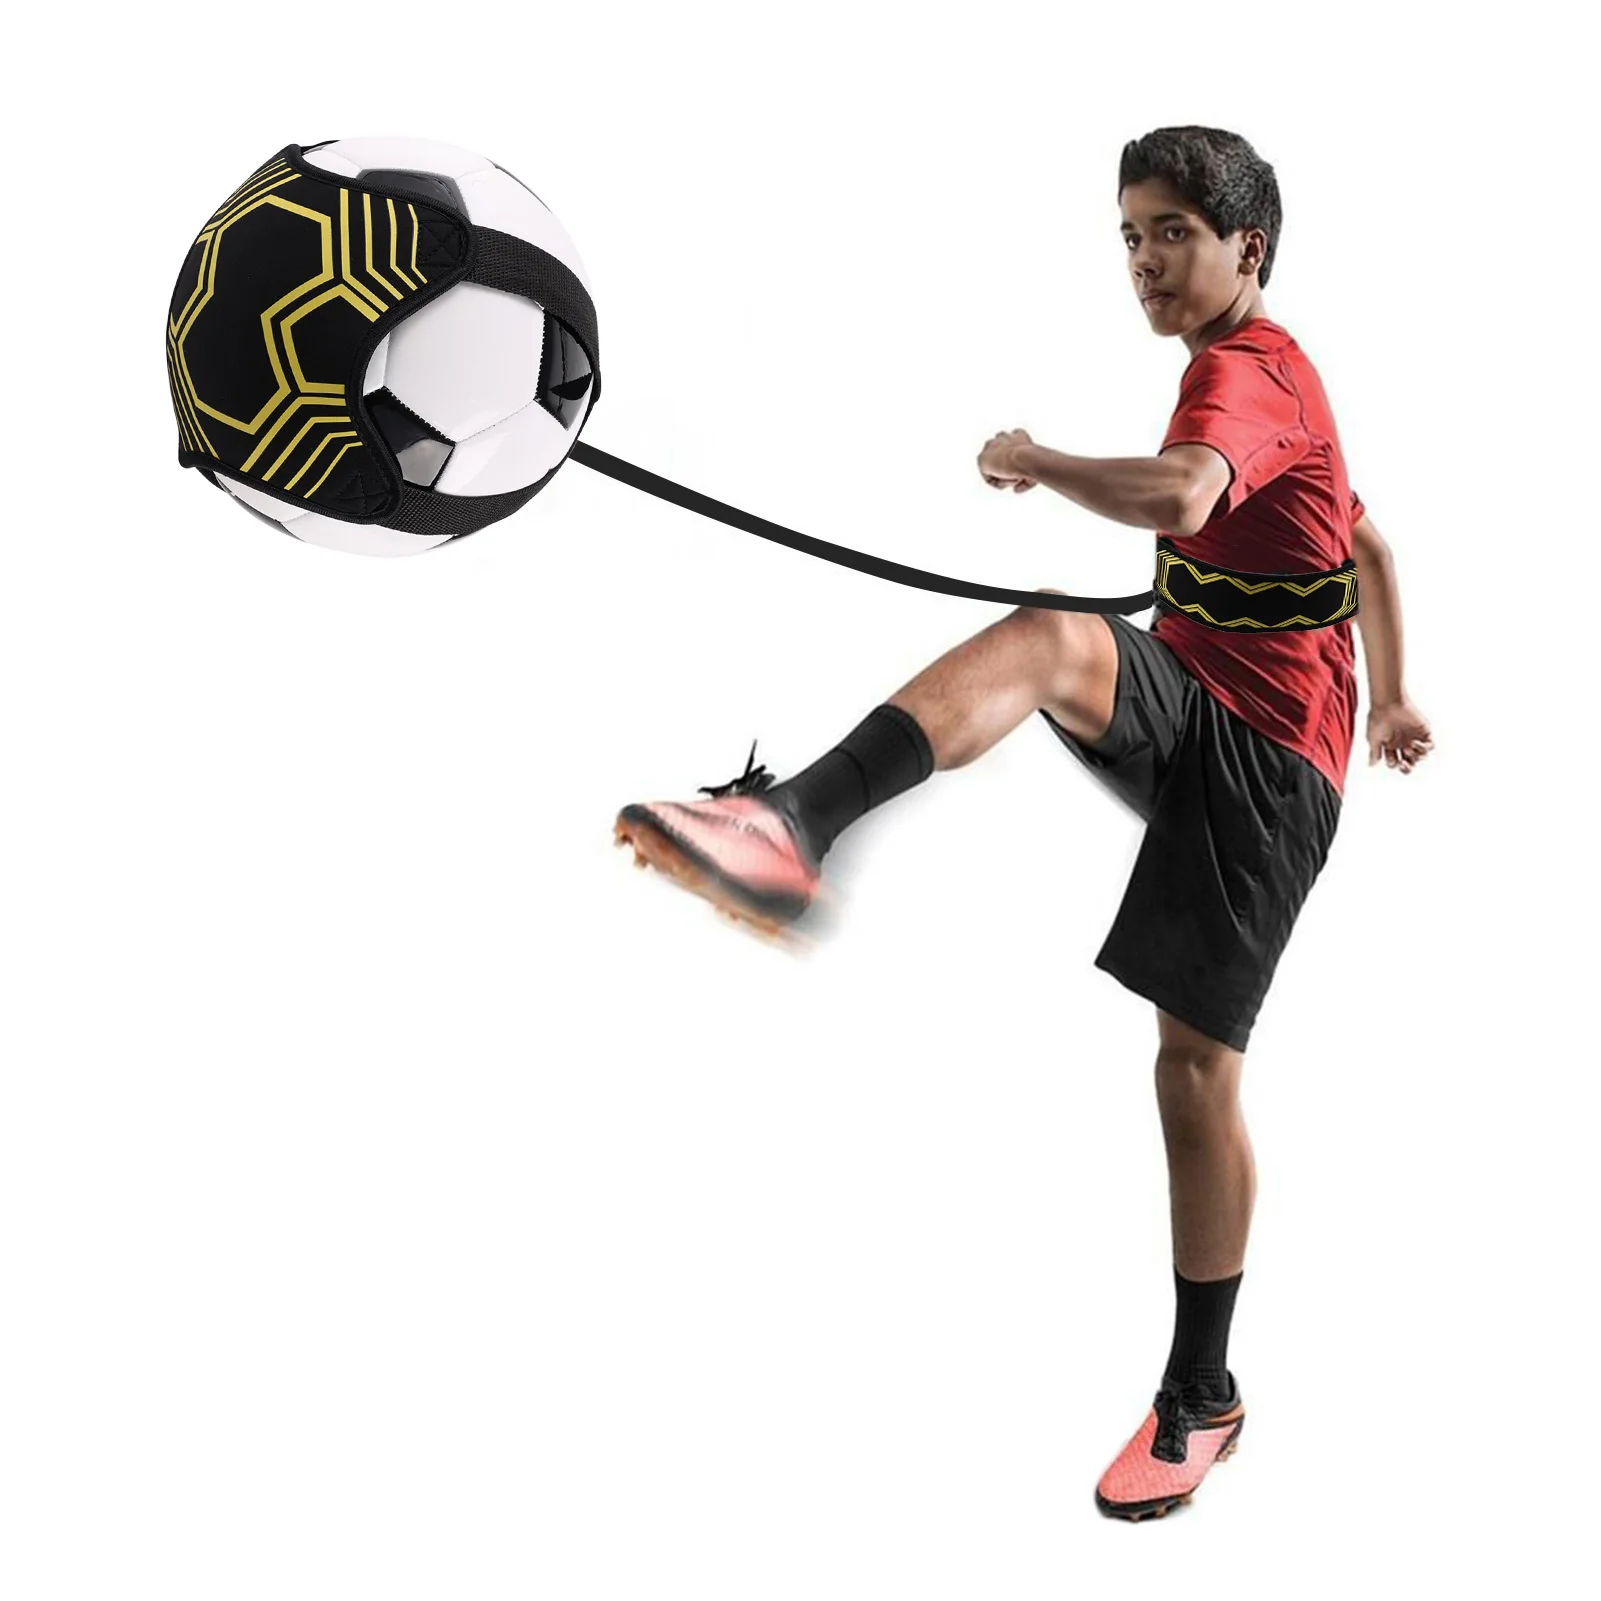 

Football Kick Trainer Useful Soccer Practice Training Aid For Developing Controlling Ball Skill Adjustable Portable Stretchable